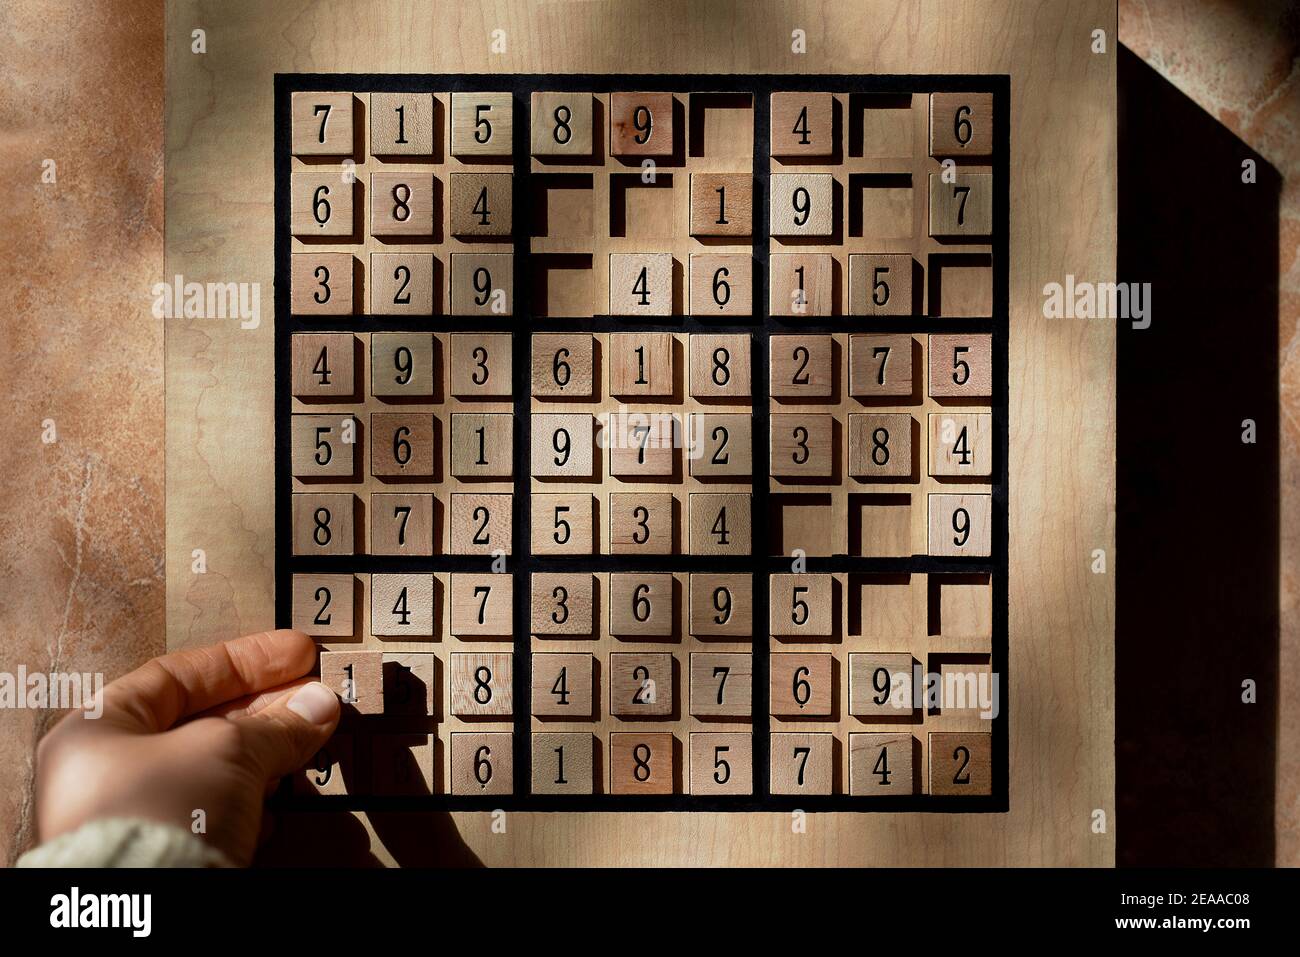 Playing on Sudoku game board with puzzle stock photo Stock Photo